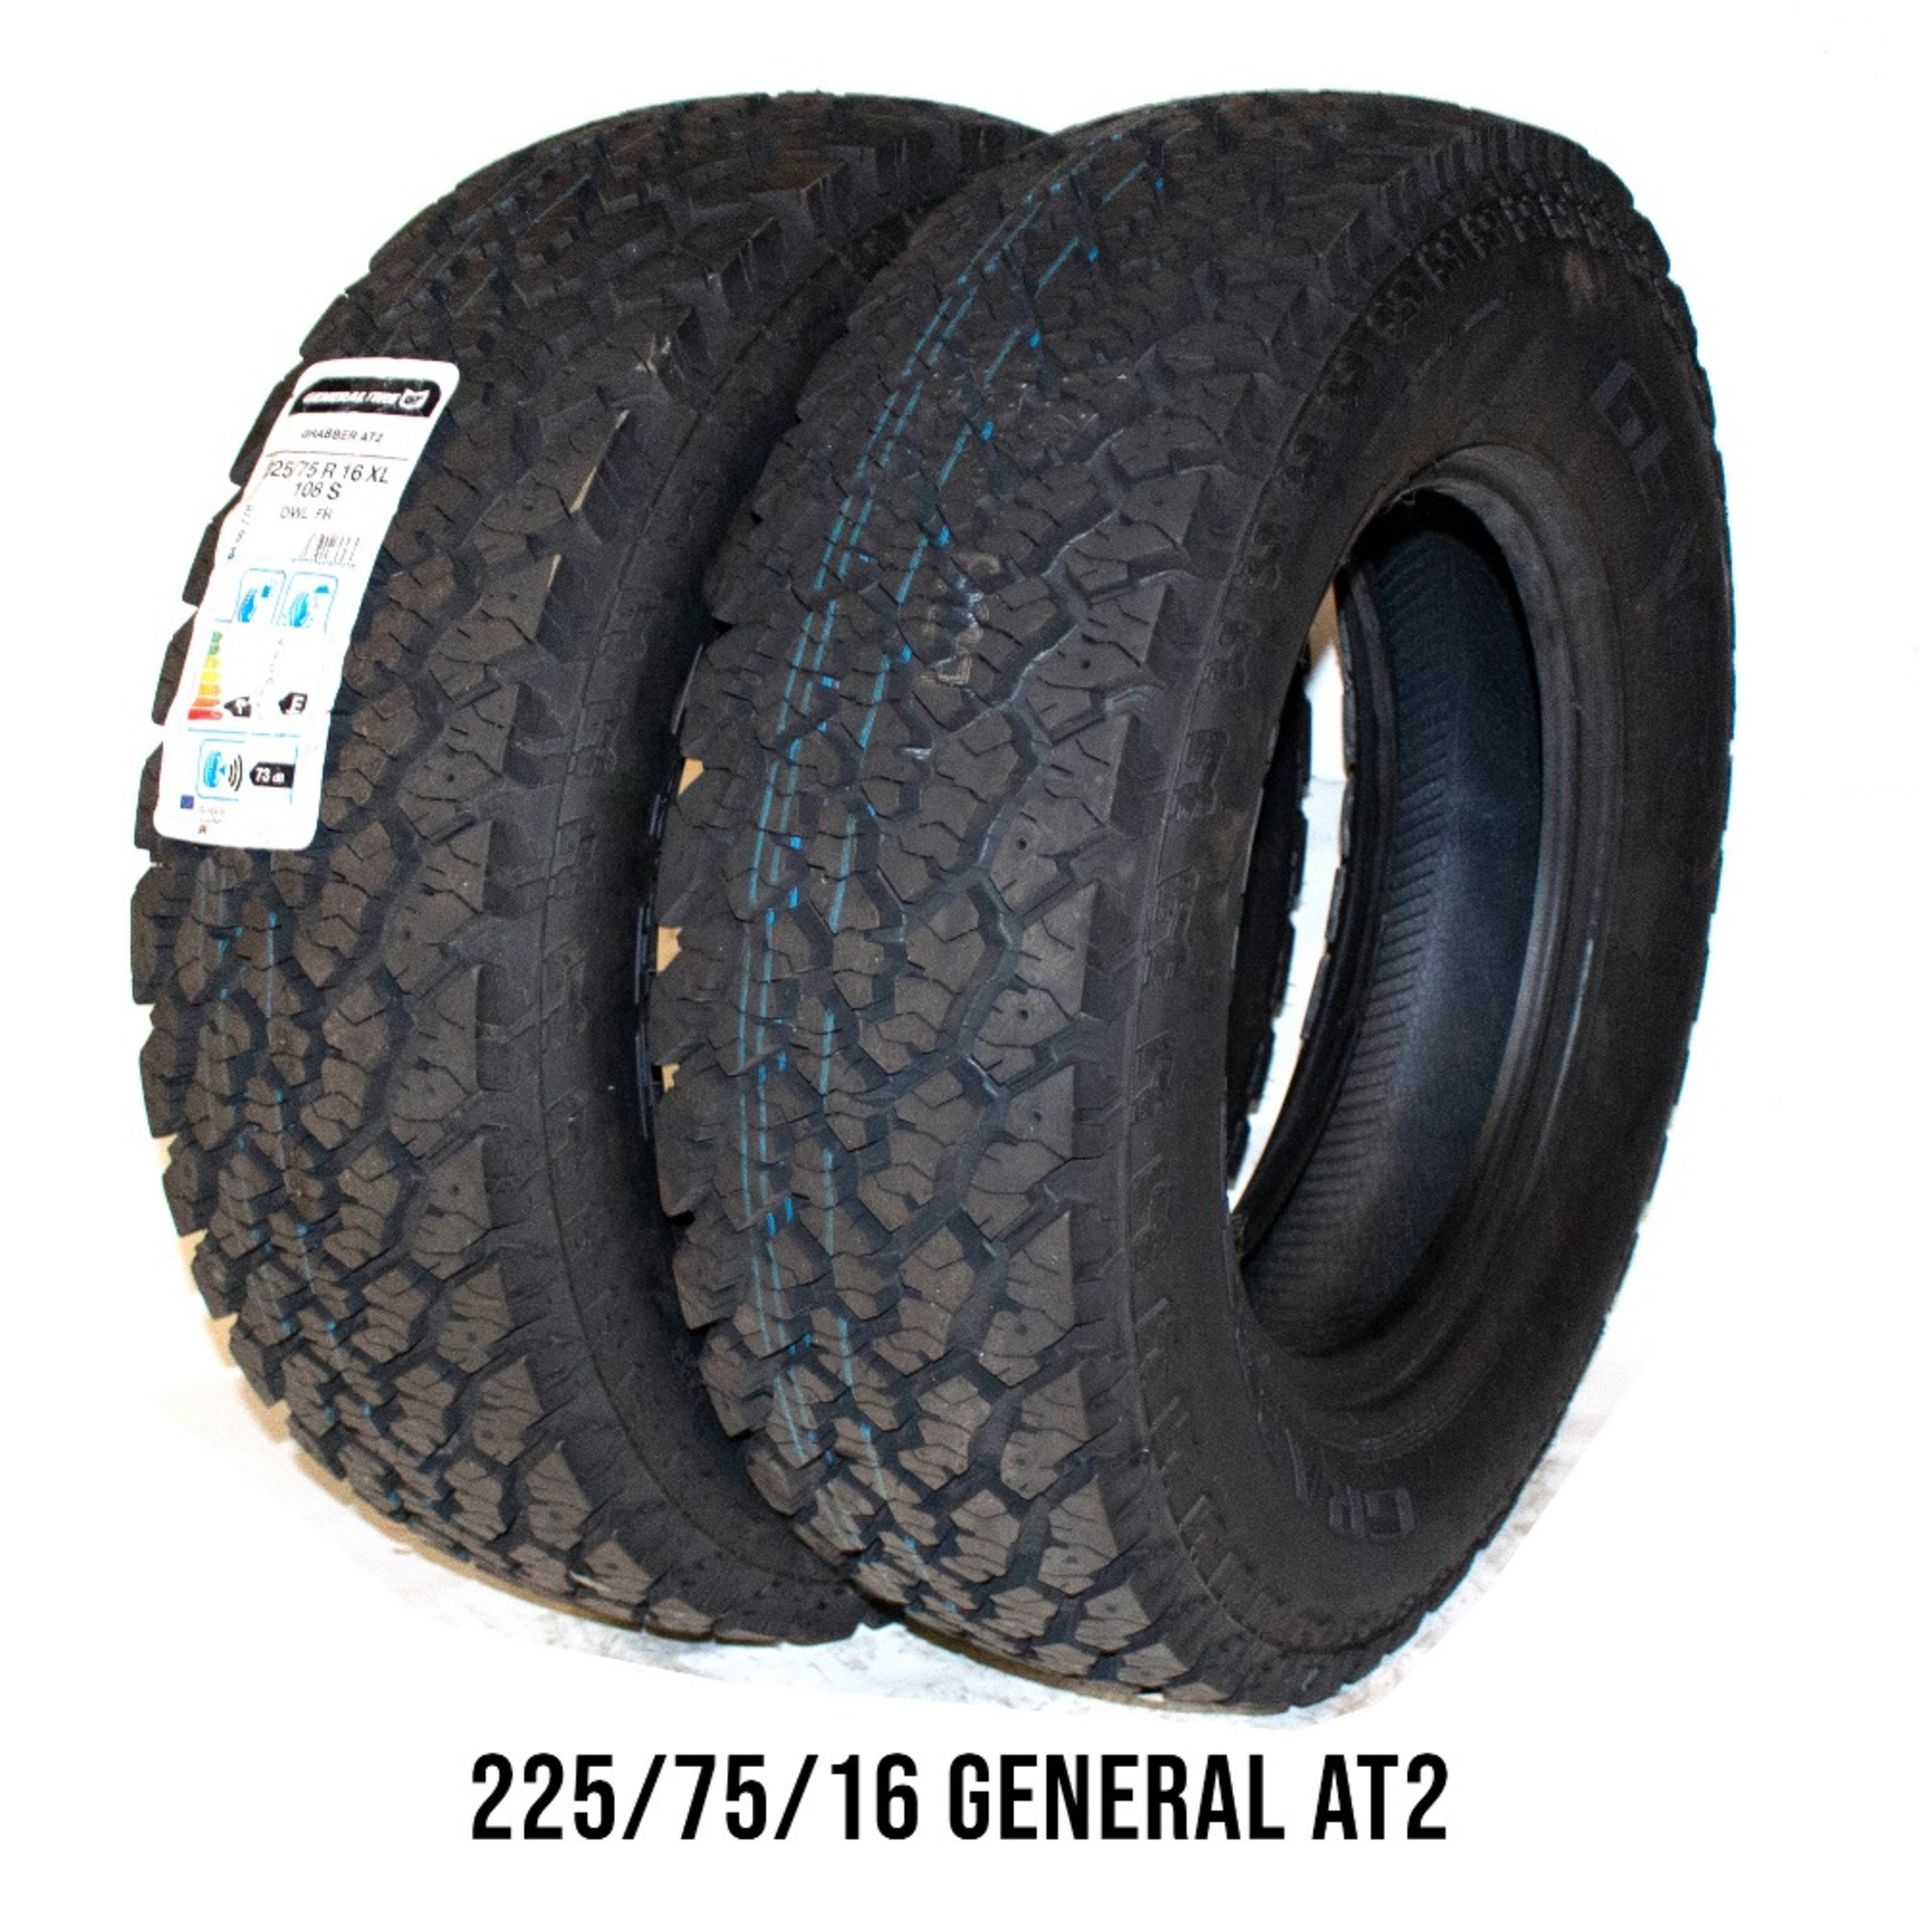 225/75R16- GENERAL AT2 - X2 TYRES